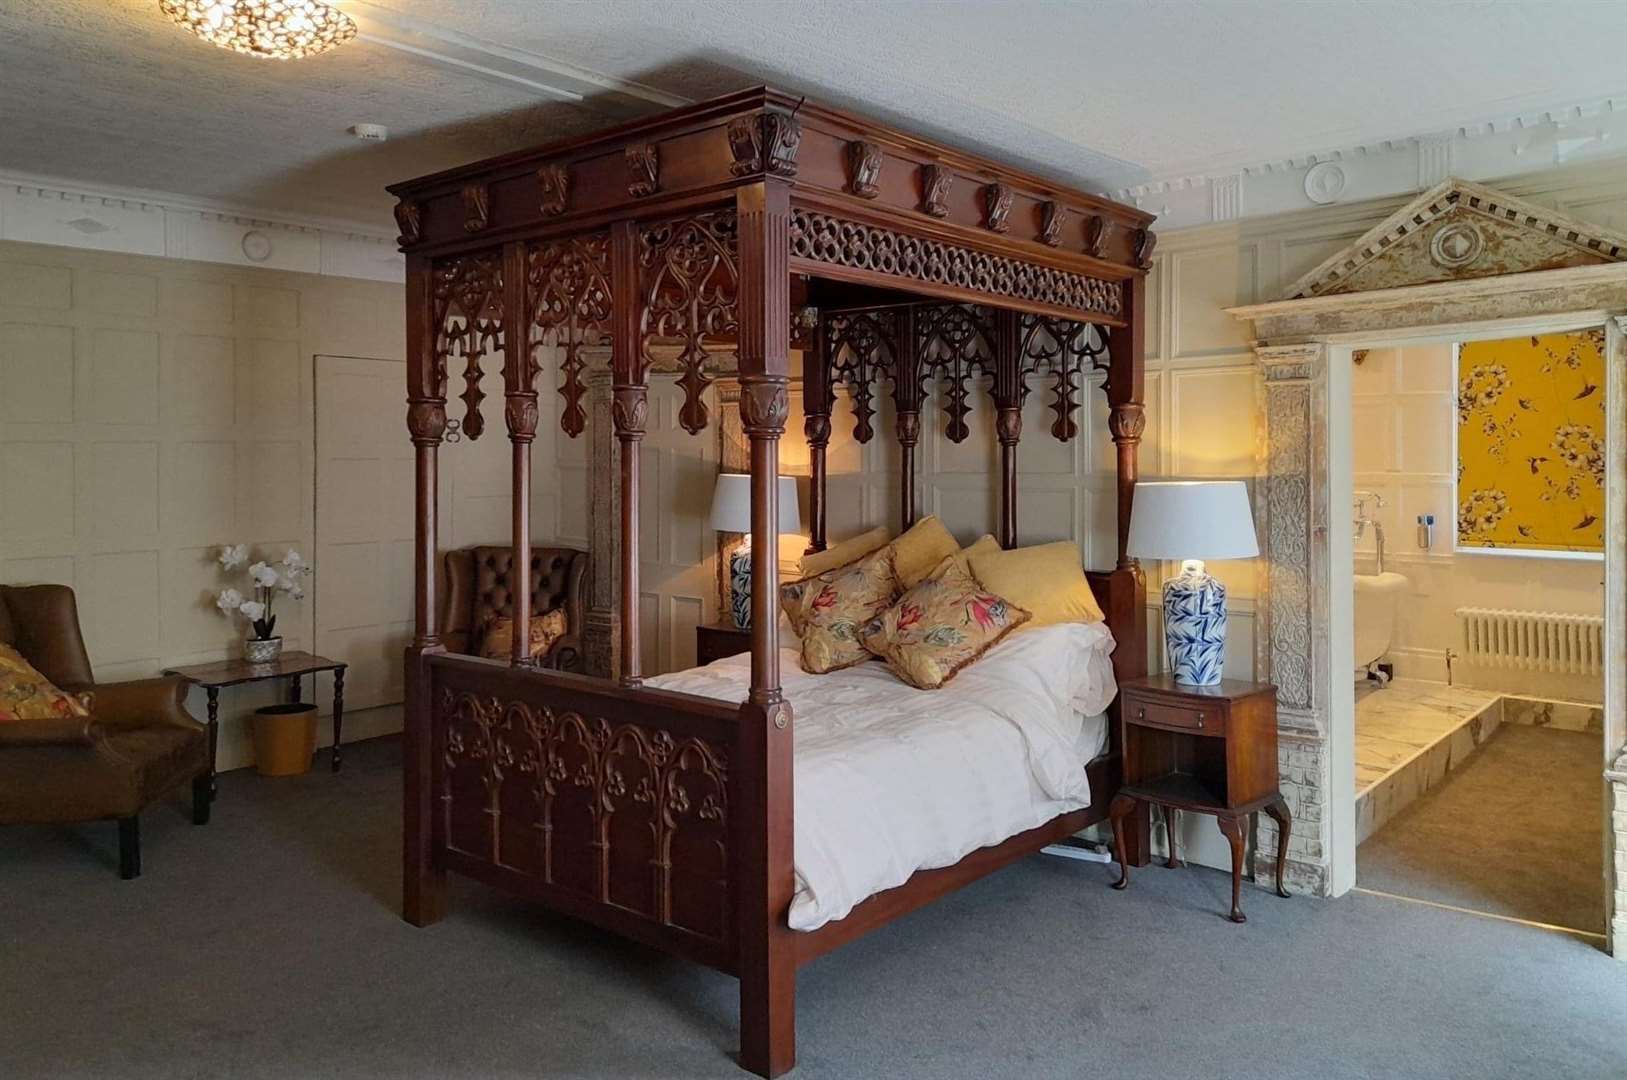 Judge Huddlestone room (Weekday £144 / Weekend £186 per night). Picture: Stone Court House Facebook